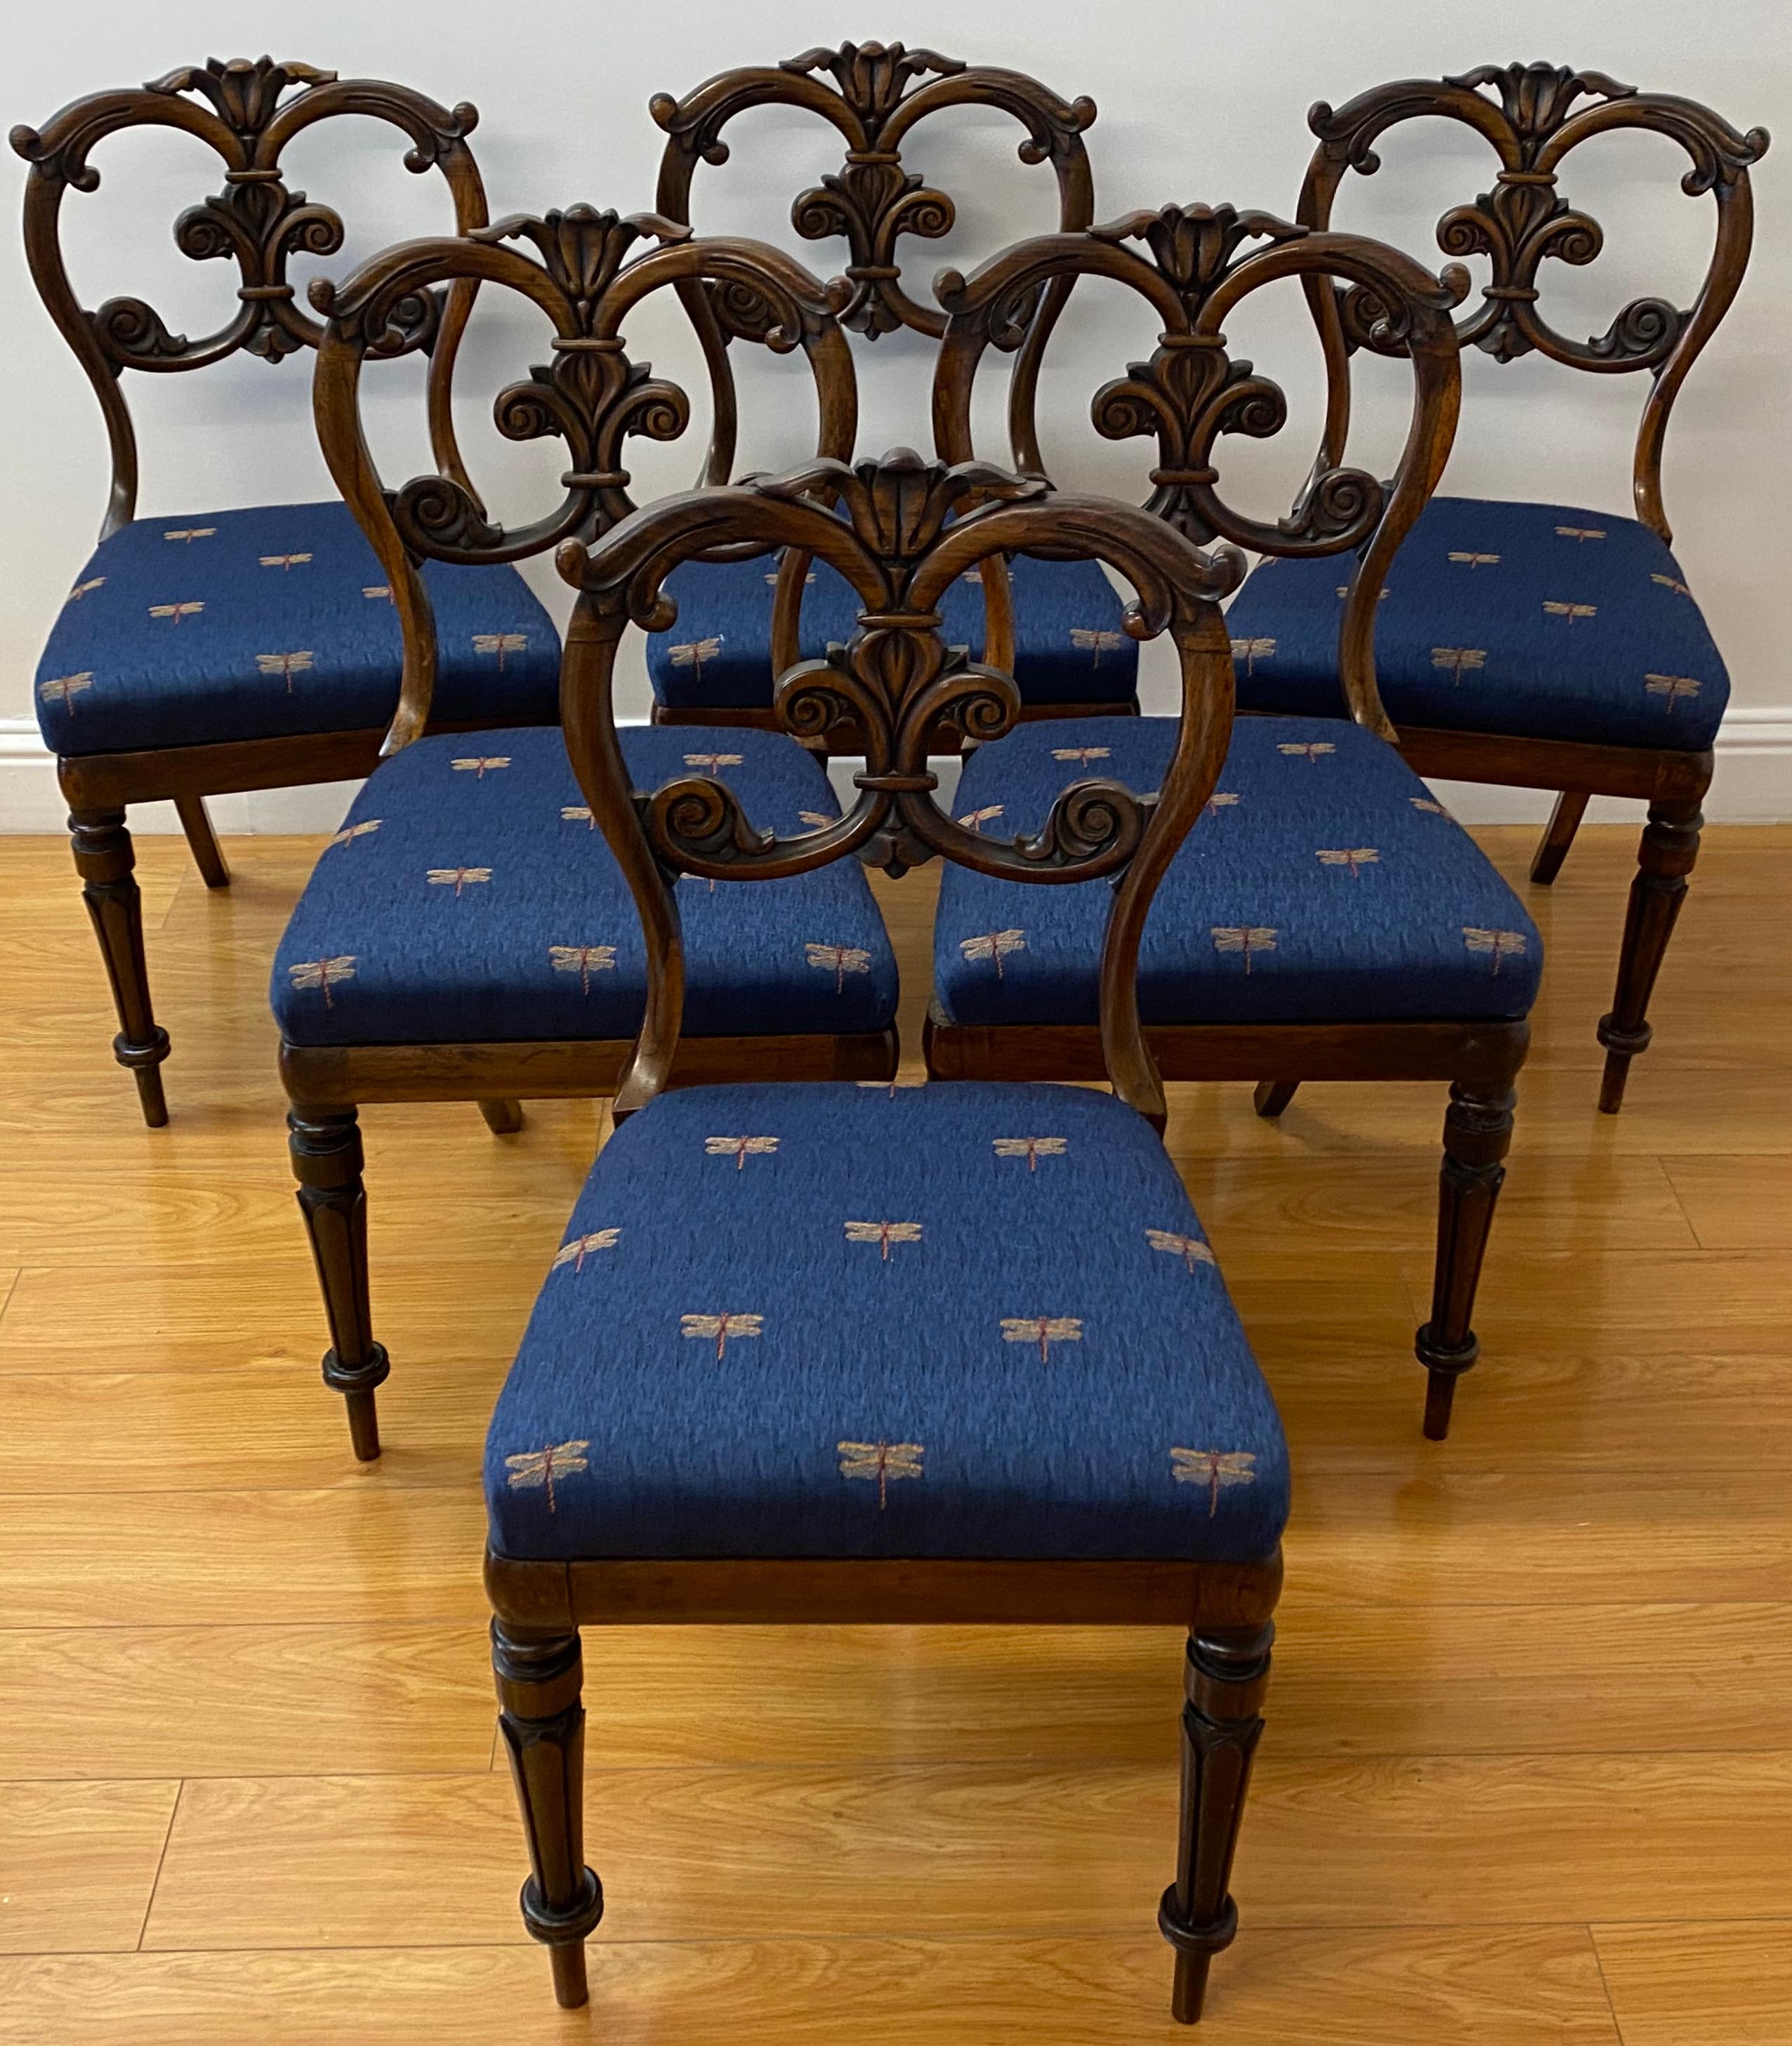 Set of six English carved rosewood dining chairs, c.1850

Gorgeous mid 19th century hand carved dining chairs with drop in seats

The current seat coverings have a handsome dragonfly pattern (easily reupholstered)

18